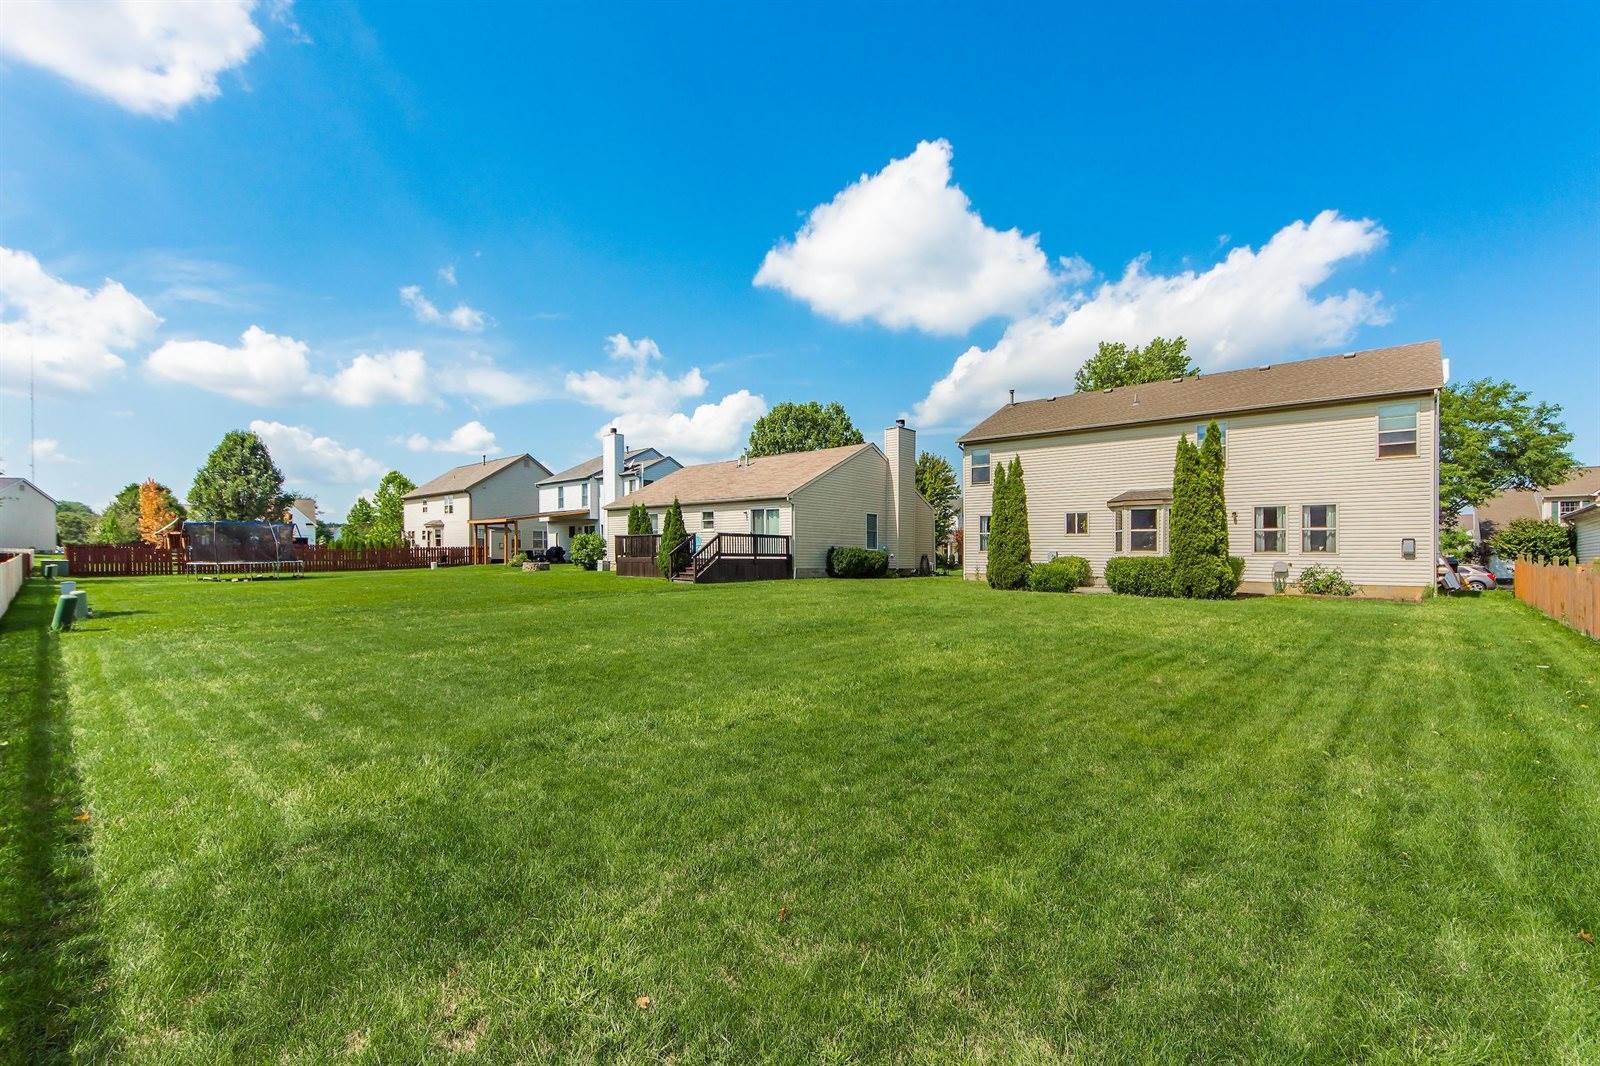 7268 Clancy Way, Westerville, OH 43082